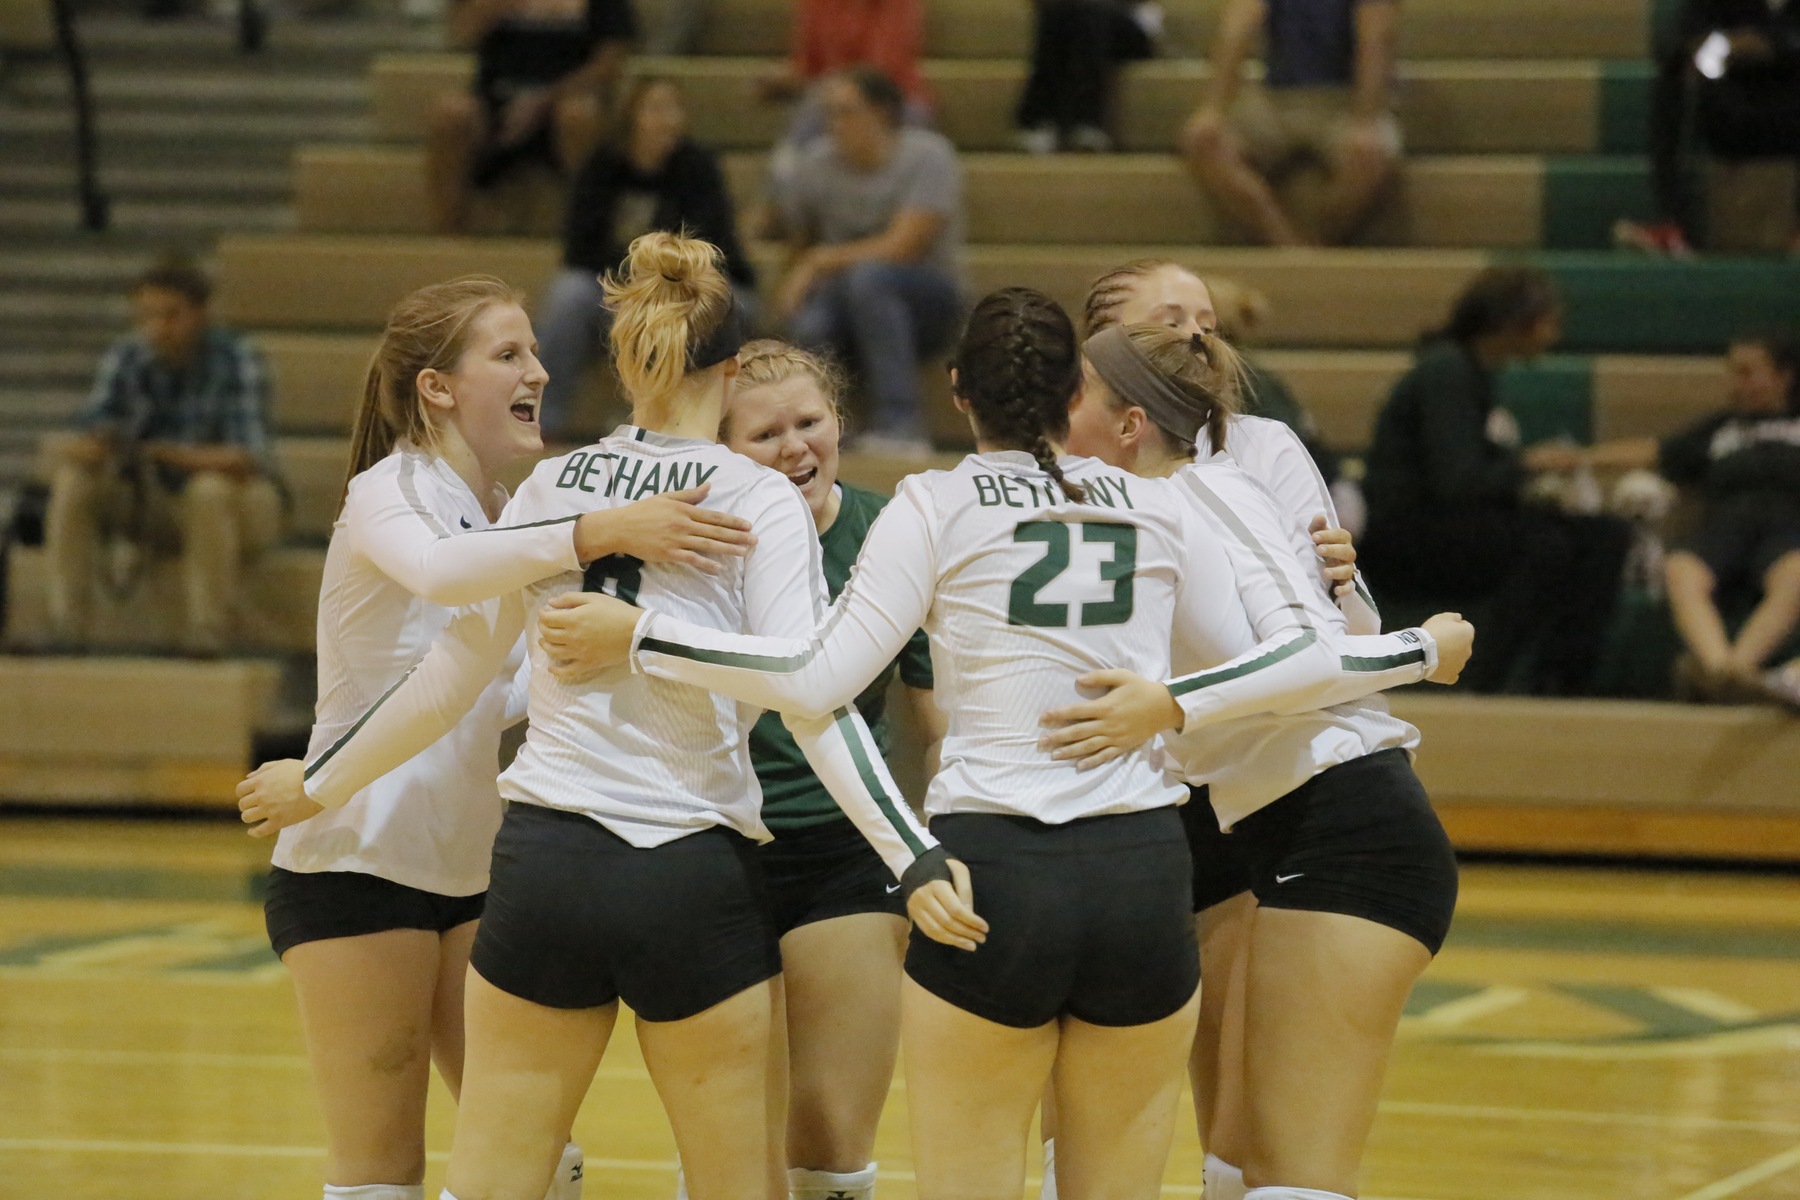 Bethany Volleyball Drops Two at Ginny Hunt Kilt Classic